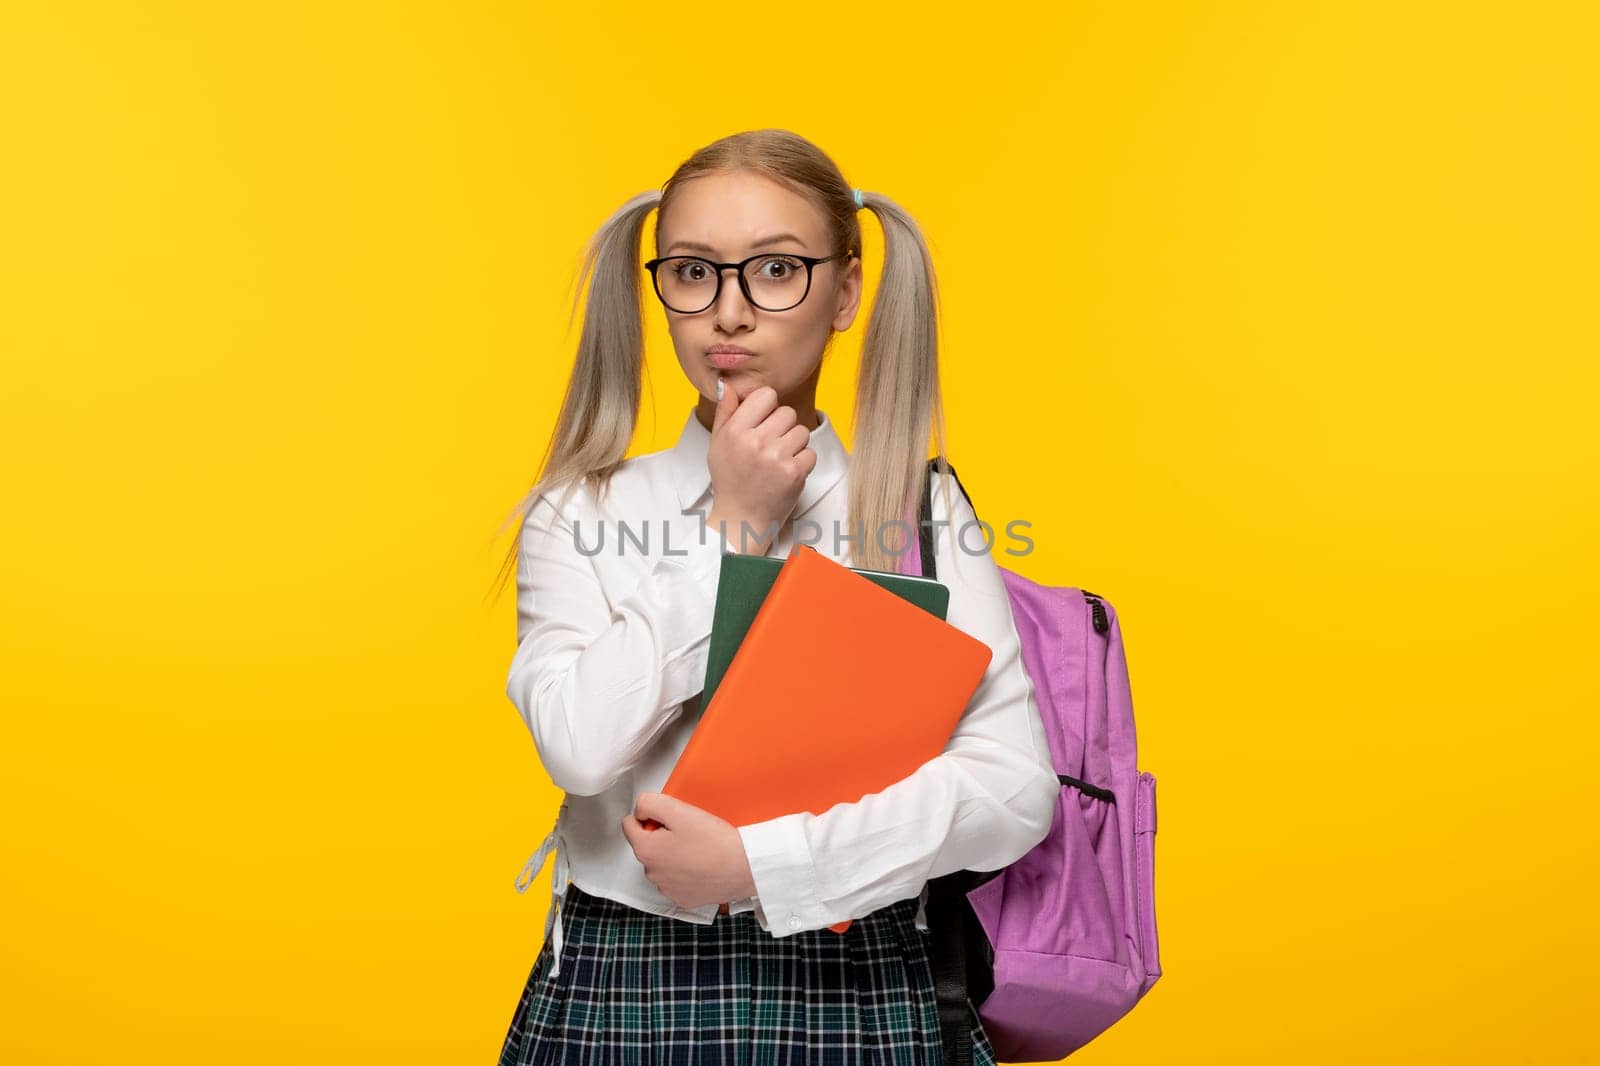 world book day thinking blonde student with ponytails holding books on yellow background